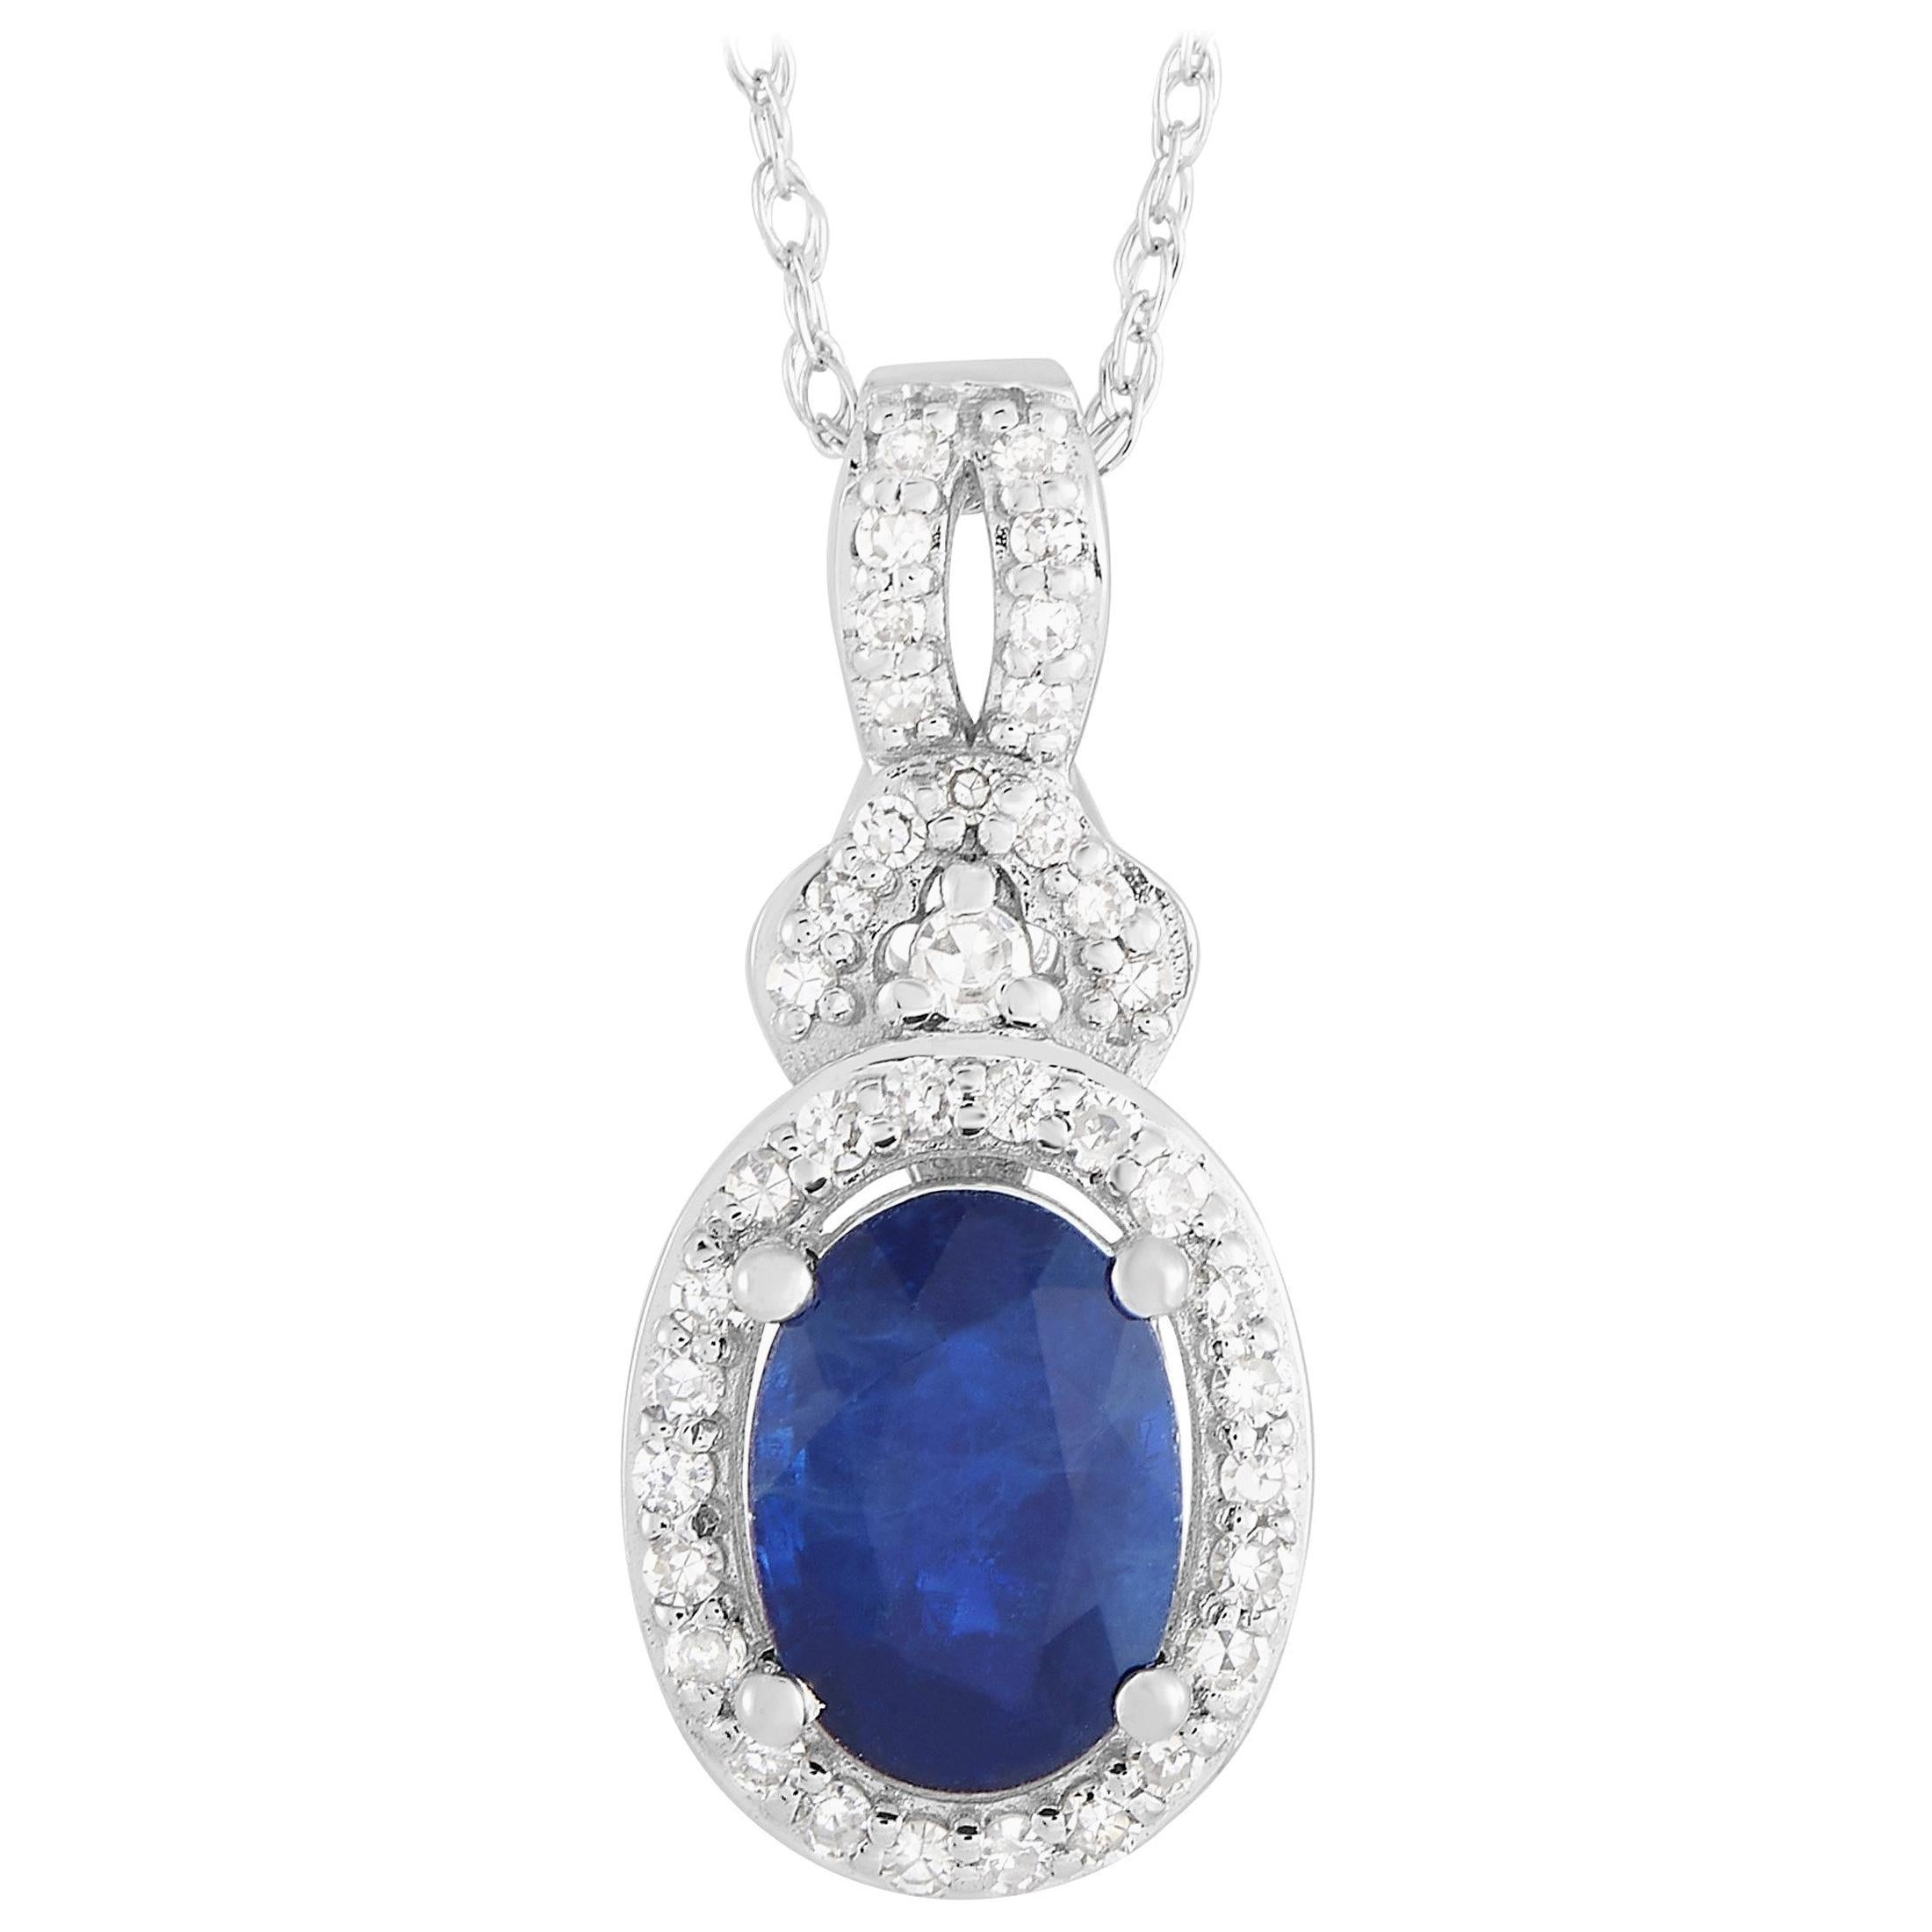 LB Exclusive 14K White Gold 0.15 ct Diamond and Sapphire Oval Pendant Necklace